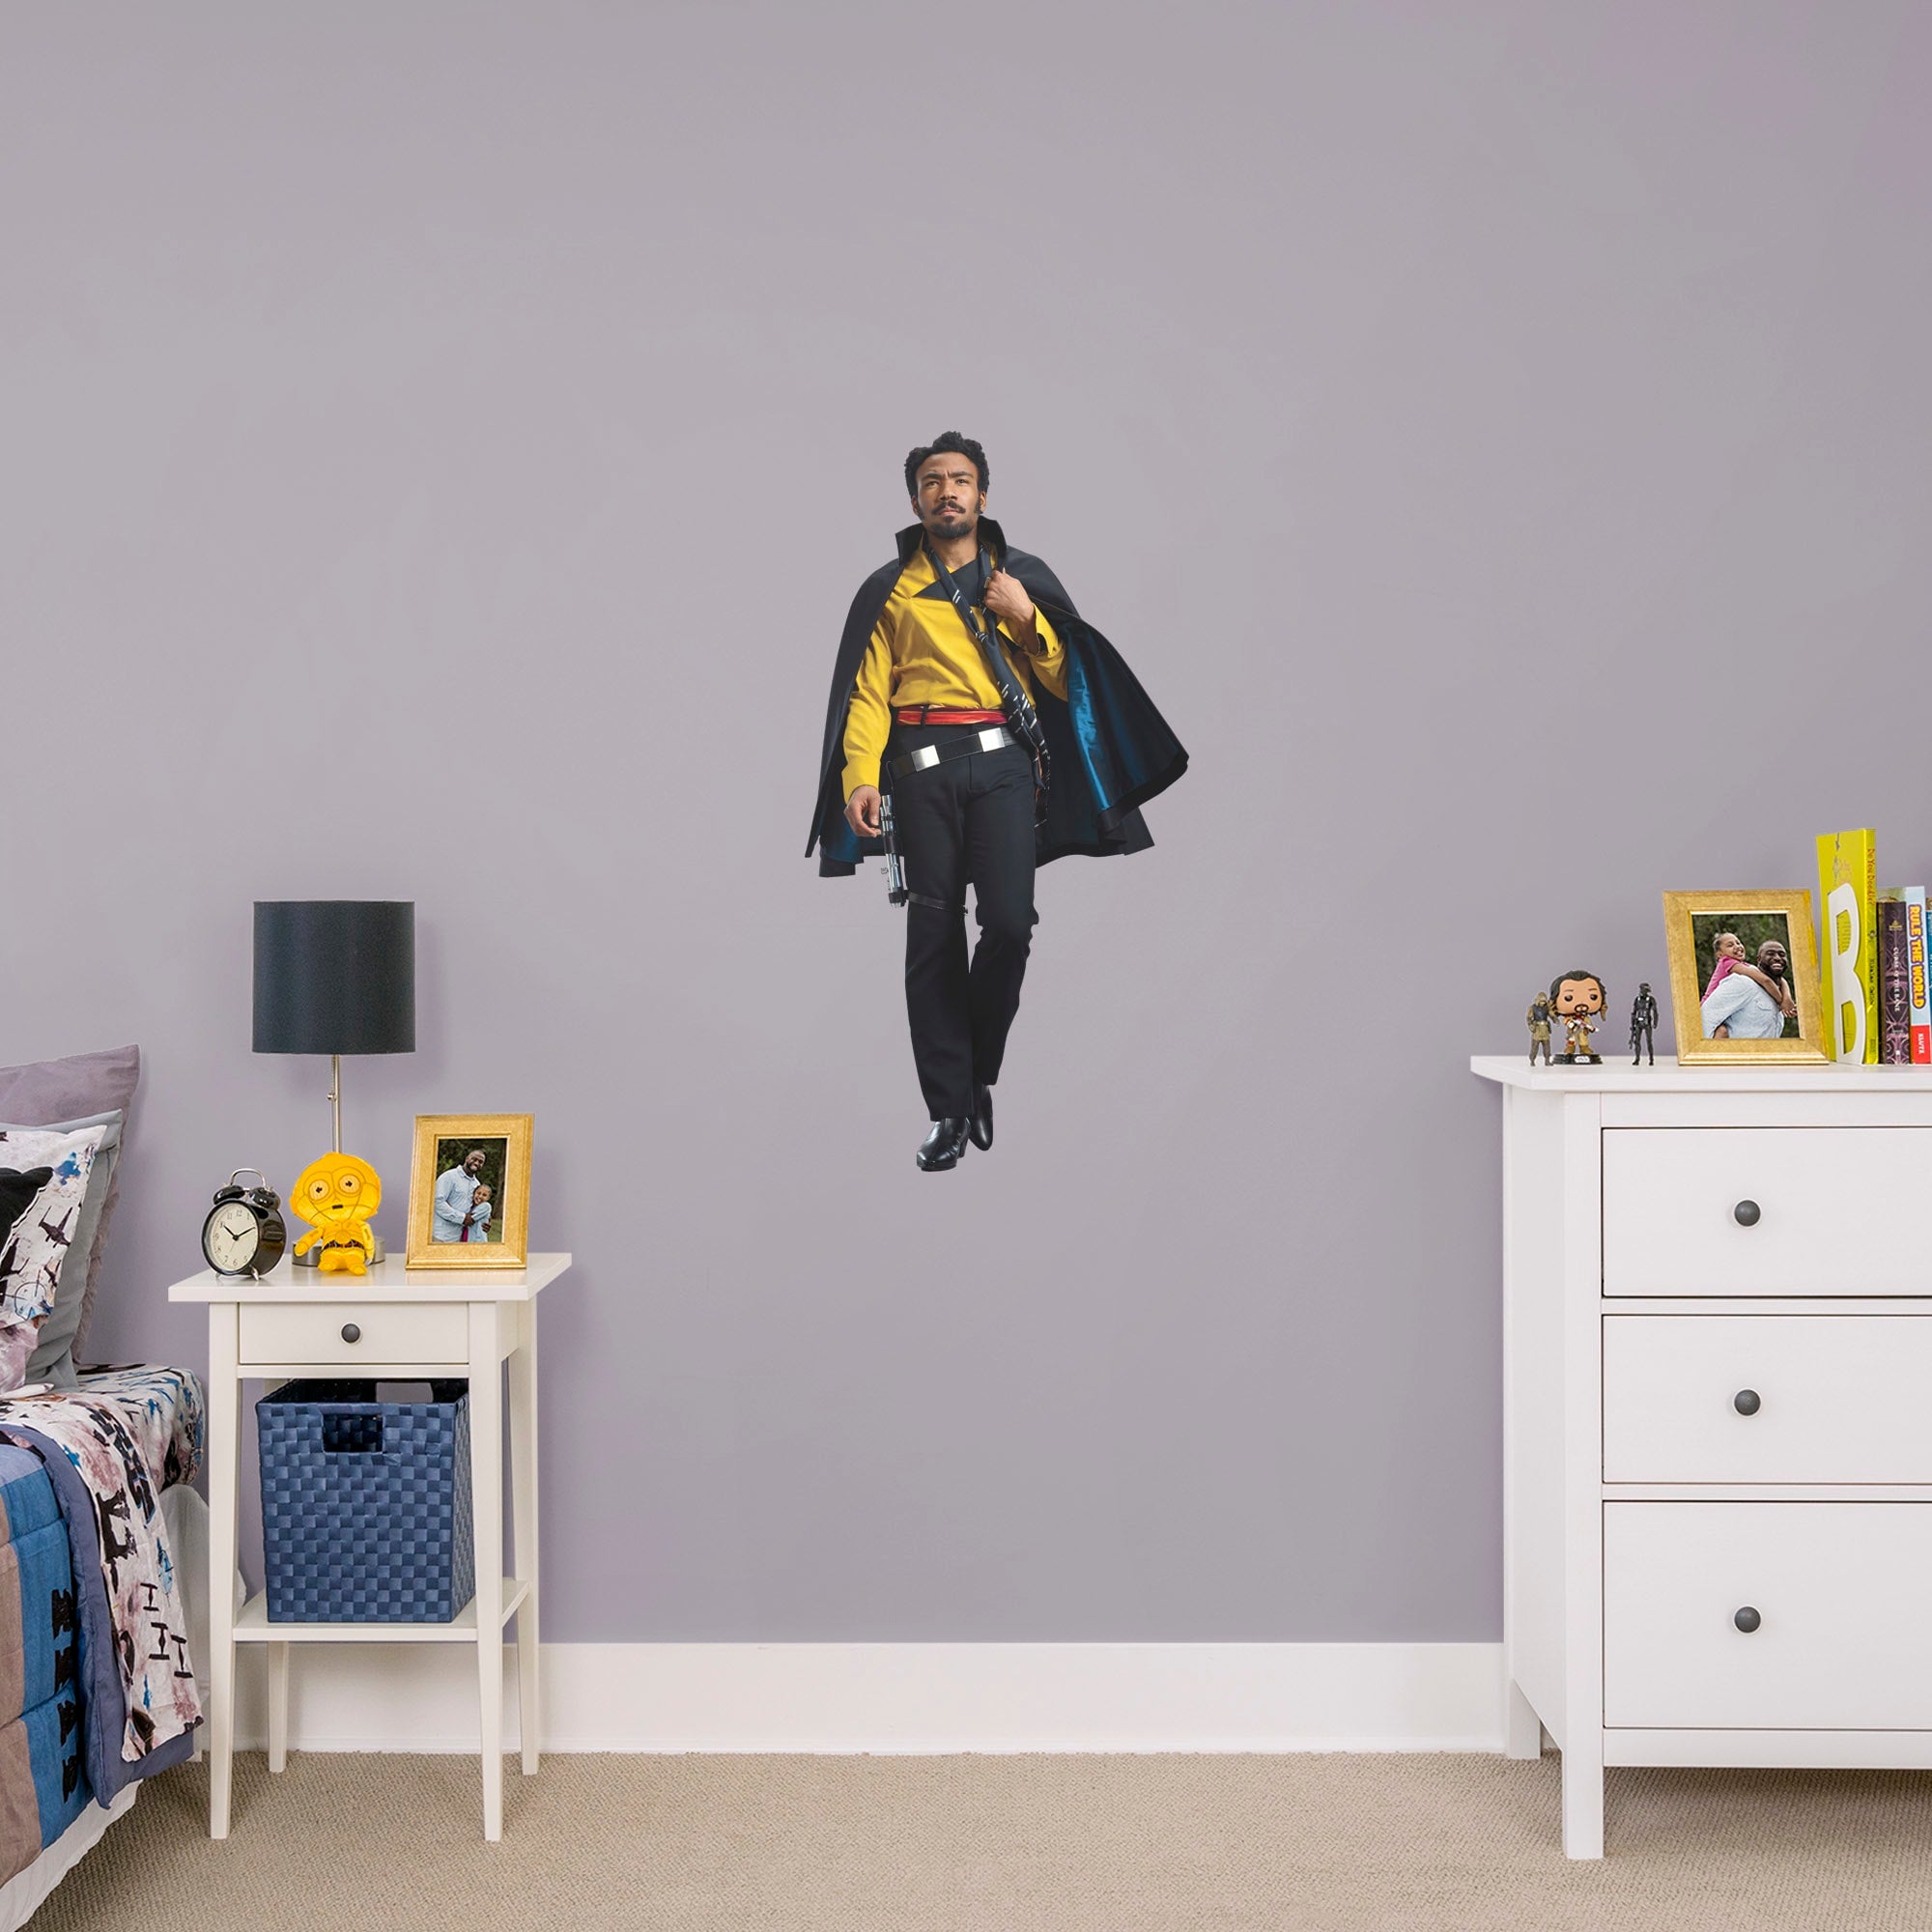 Lando Calrissian - Solo: A Star Wars Story - Officially Licensed Removable Wall Decal XL by Fathead | Vinyl